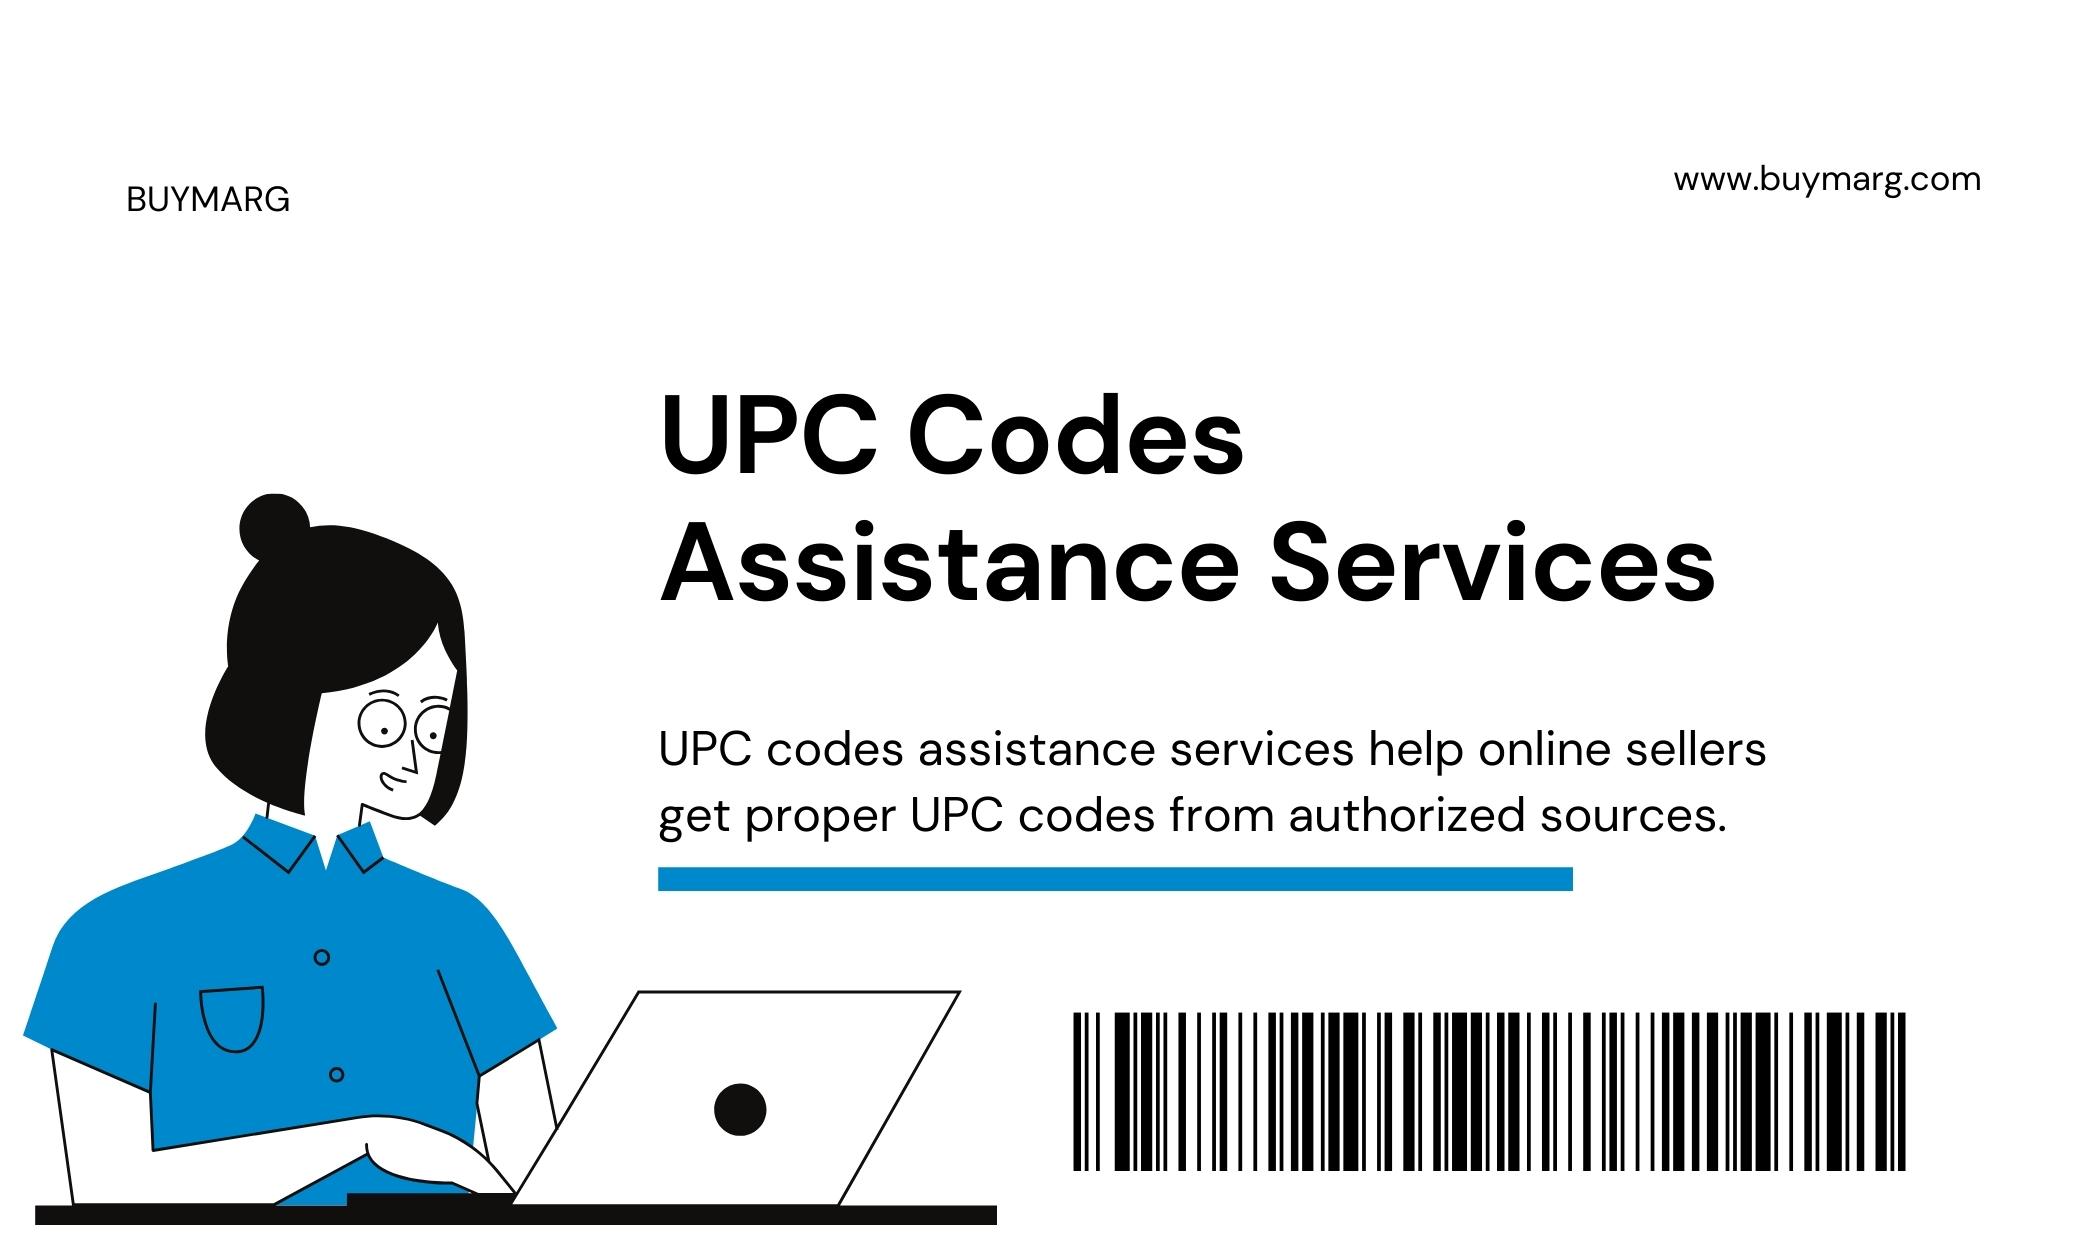 UPC Codes Assistance Services